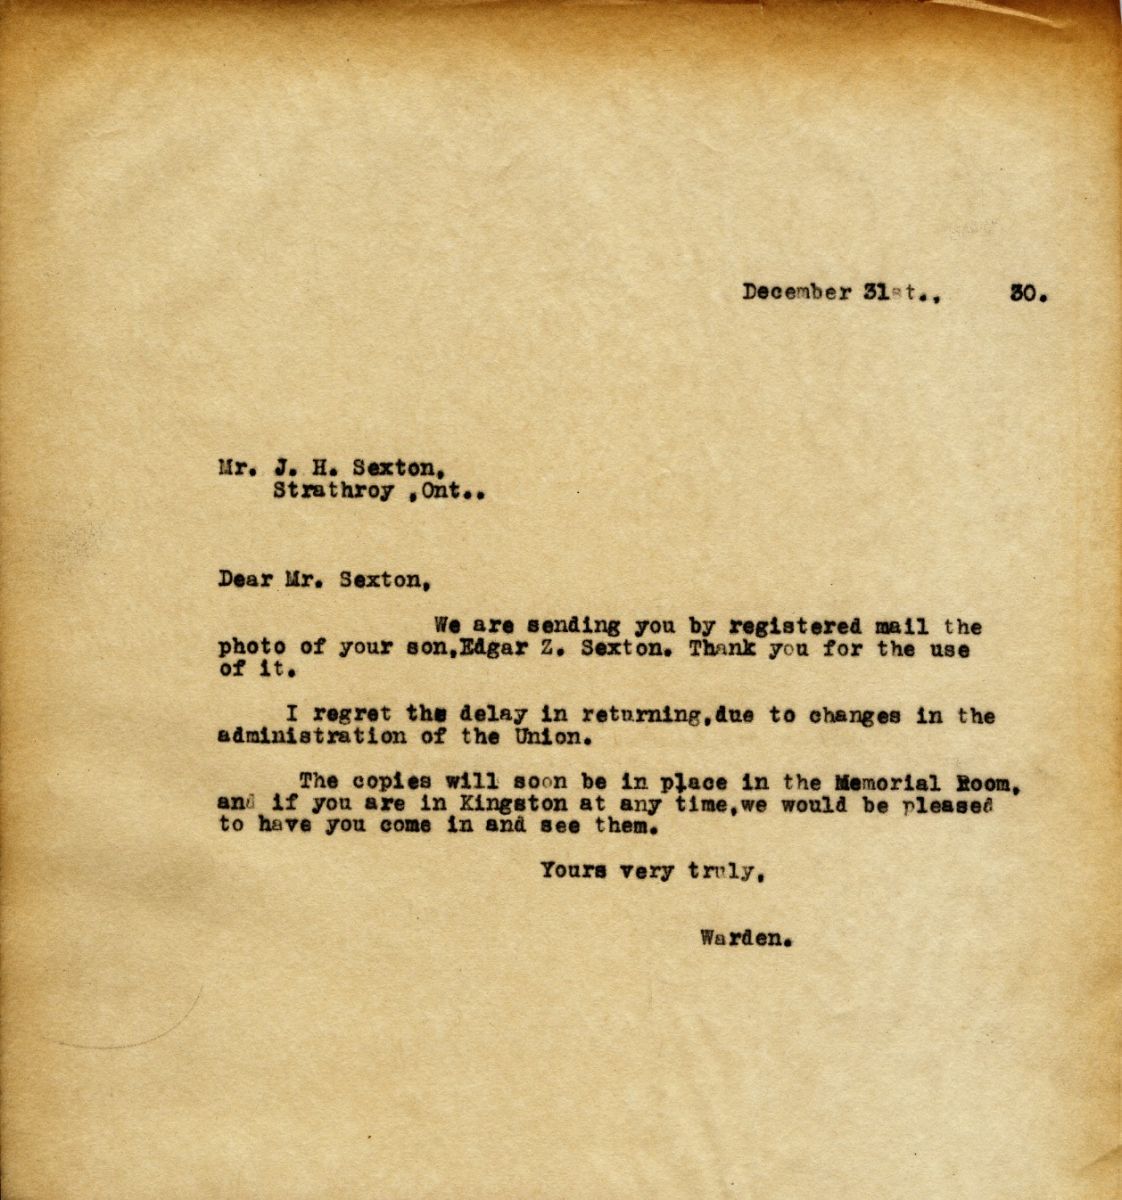 Letter from the Warden to Mr. J.H. Sexton, 31st December 1930